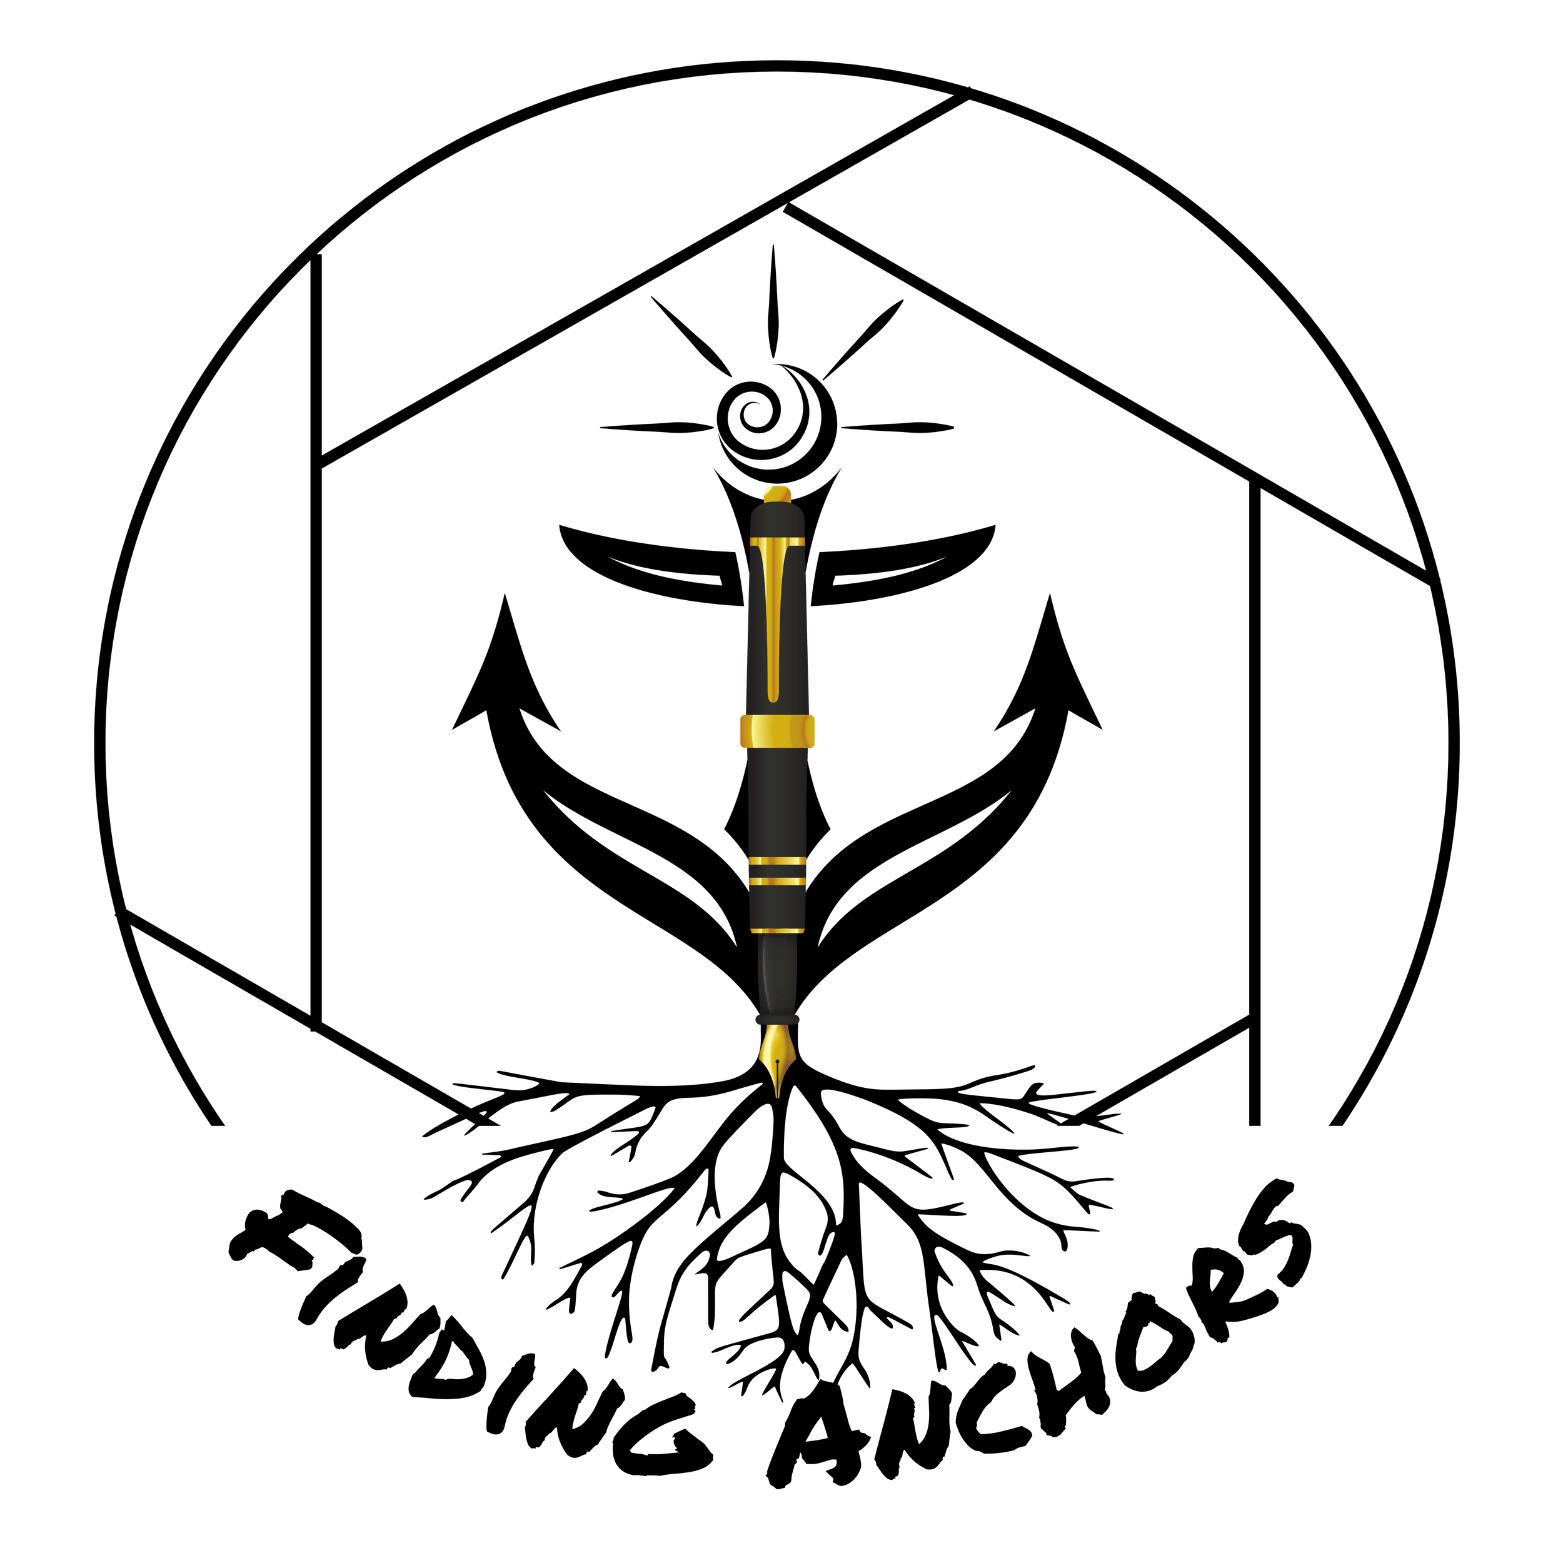 Finding Anchors in the Storm